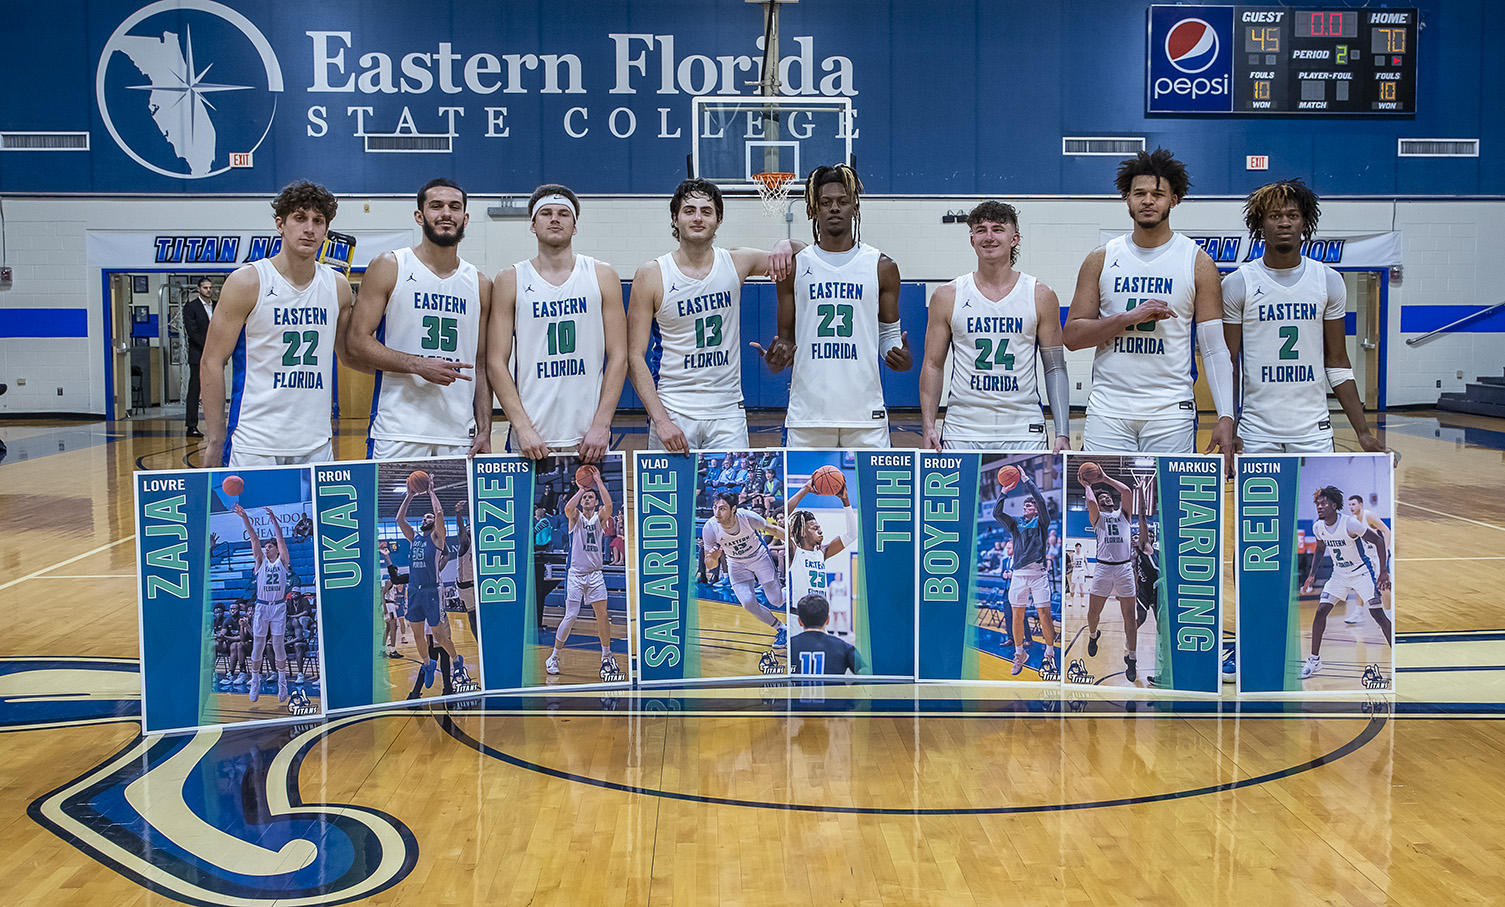 Men's basketball team tops St. Petersburg, wins share of conference title